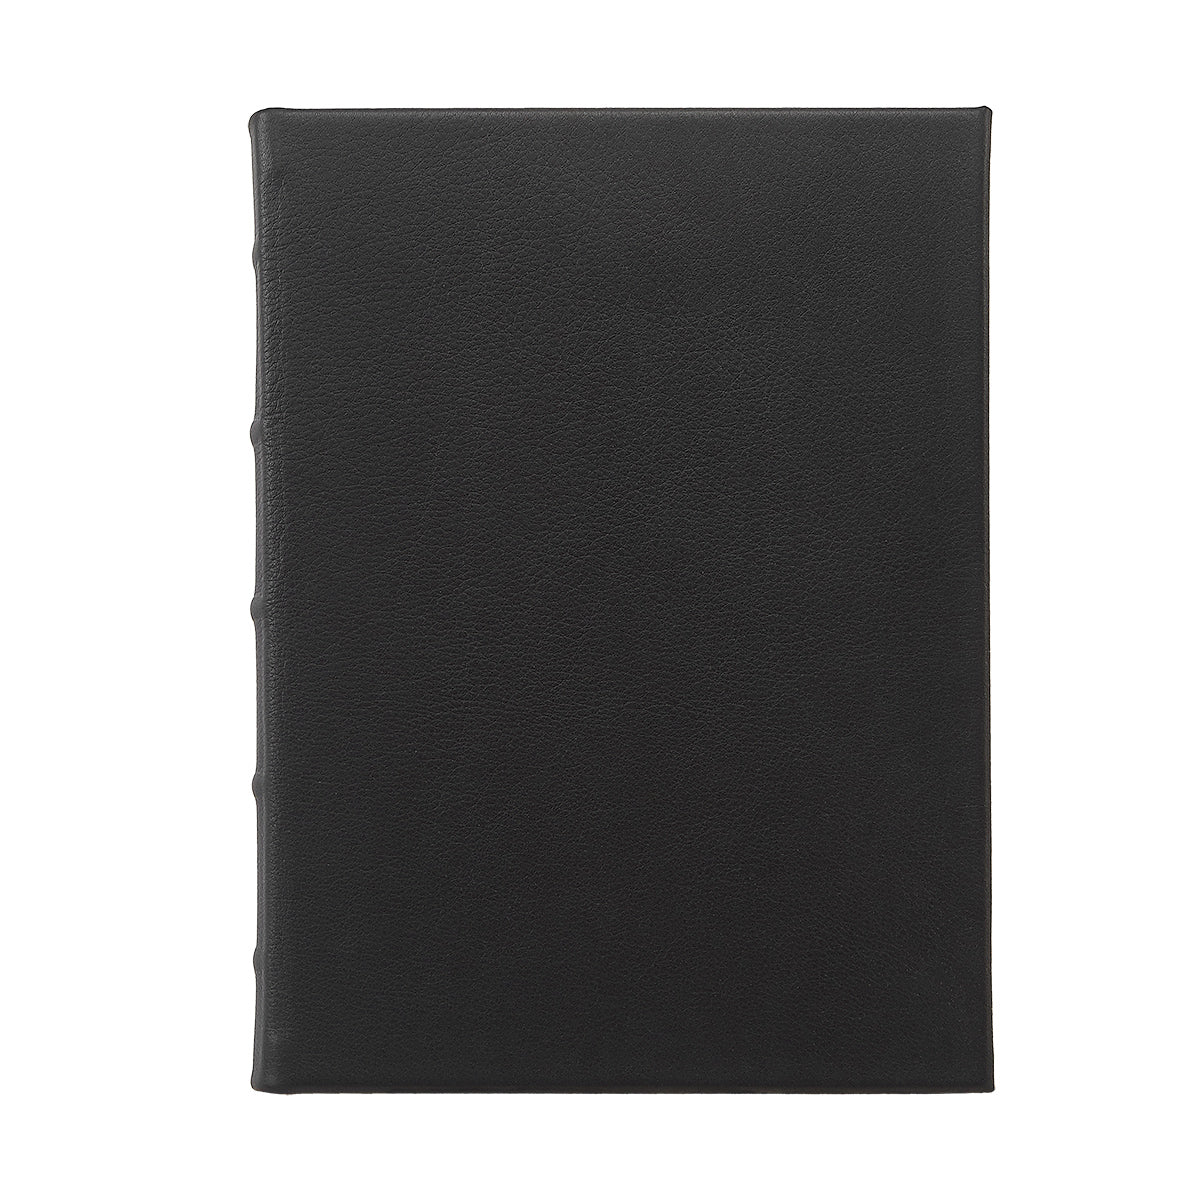 Graphic Image 9" Hardcover Journal Black Traditional Leather